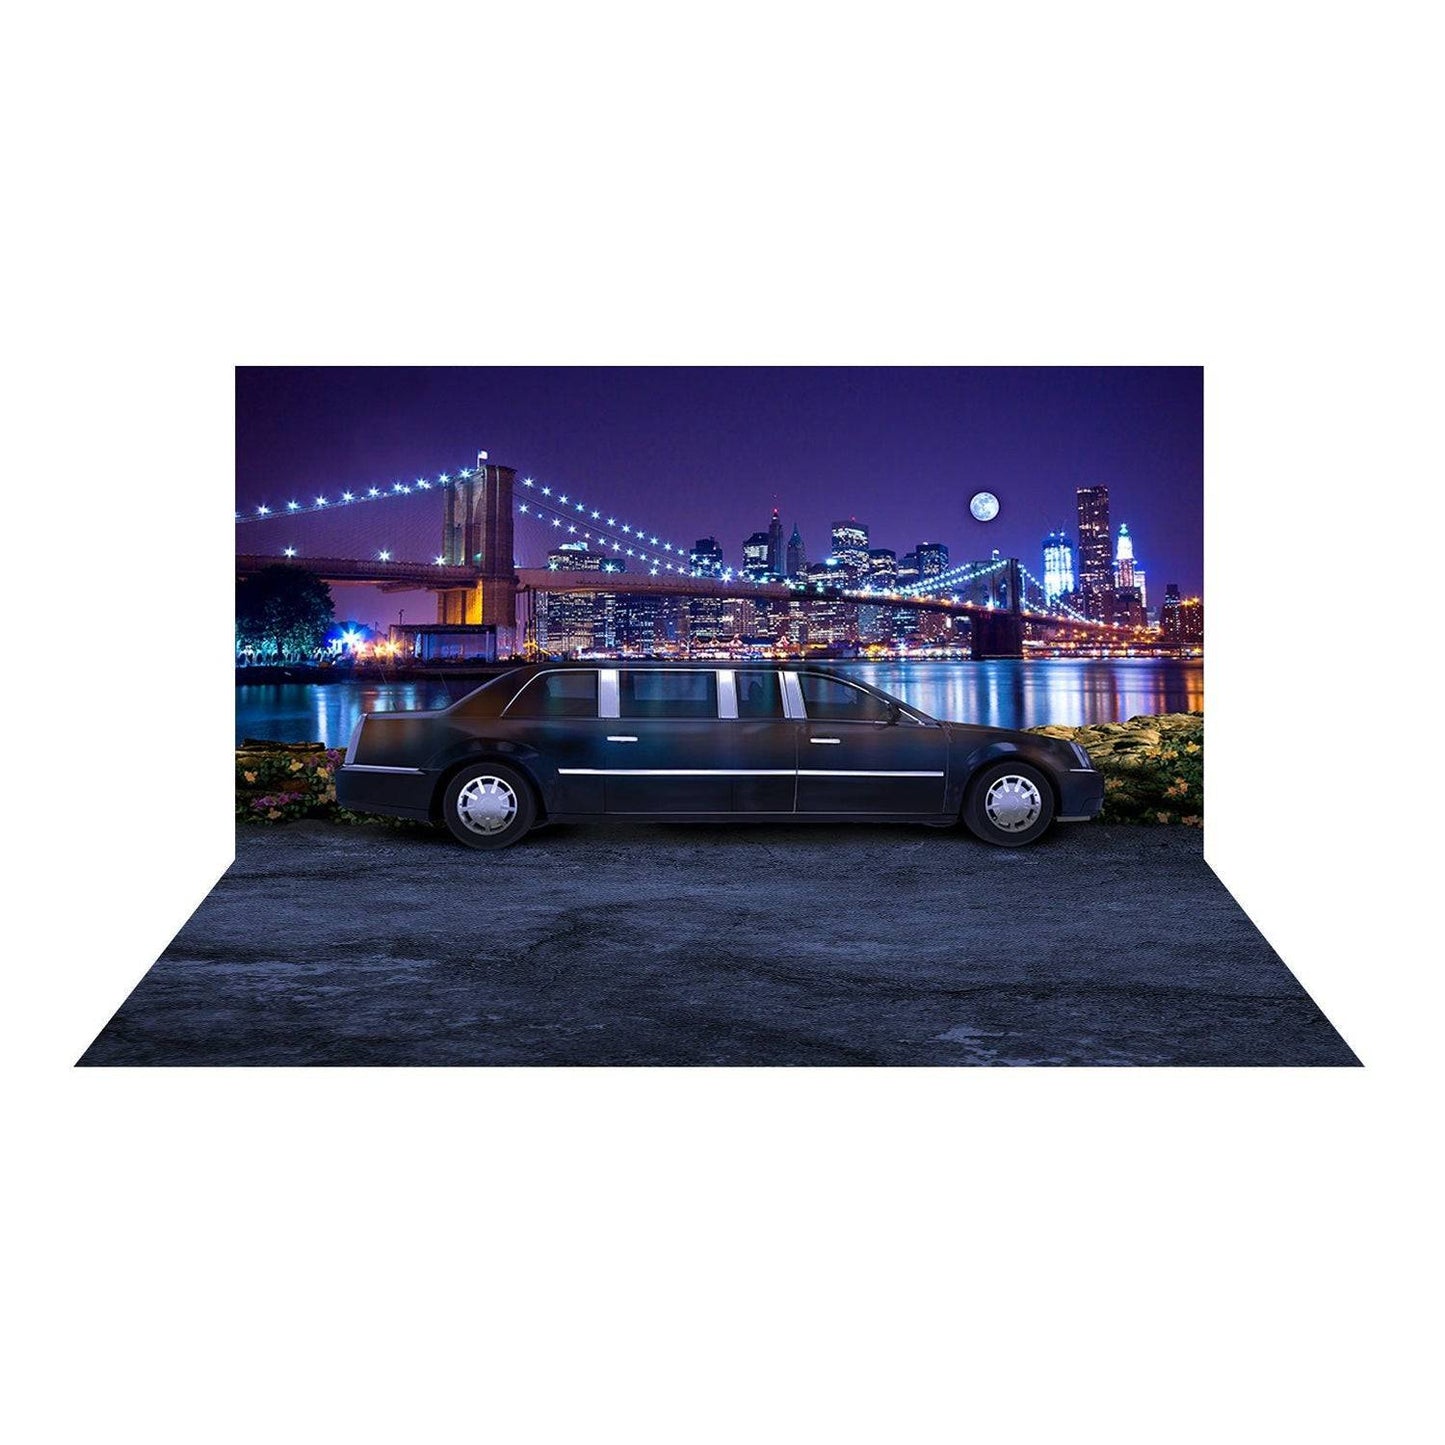 New York Limousine Party Photography Background - Pro 16  x 18  